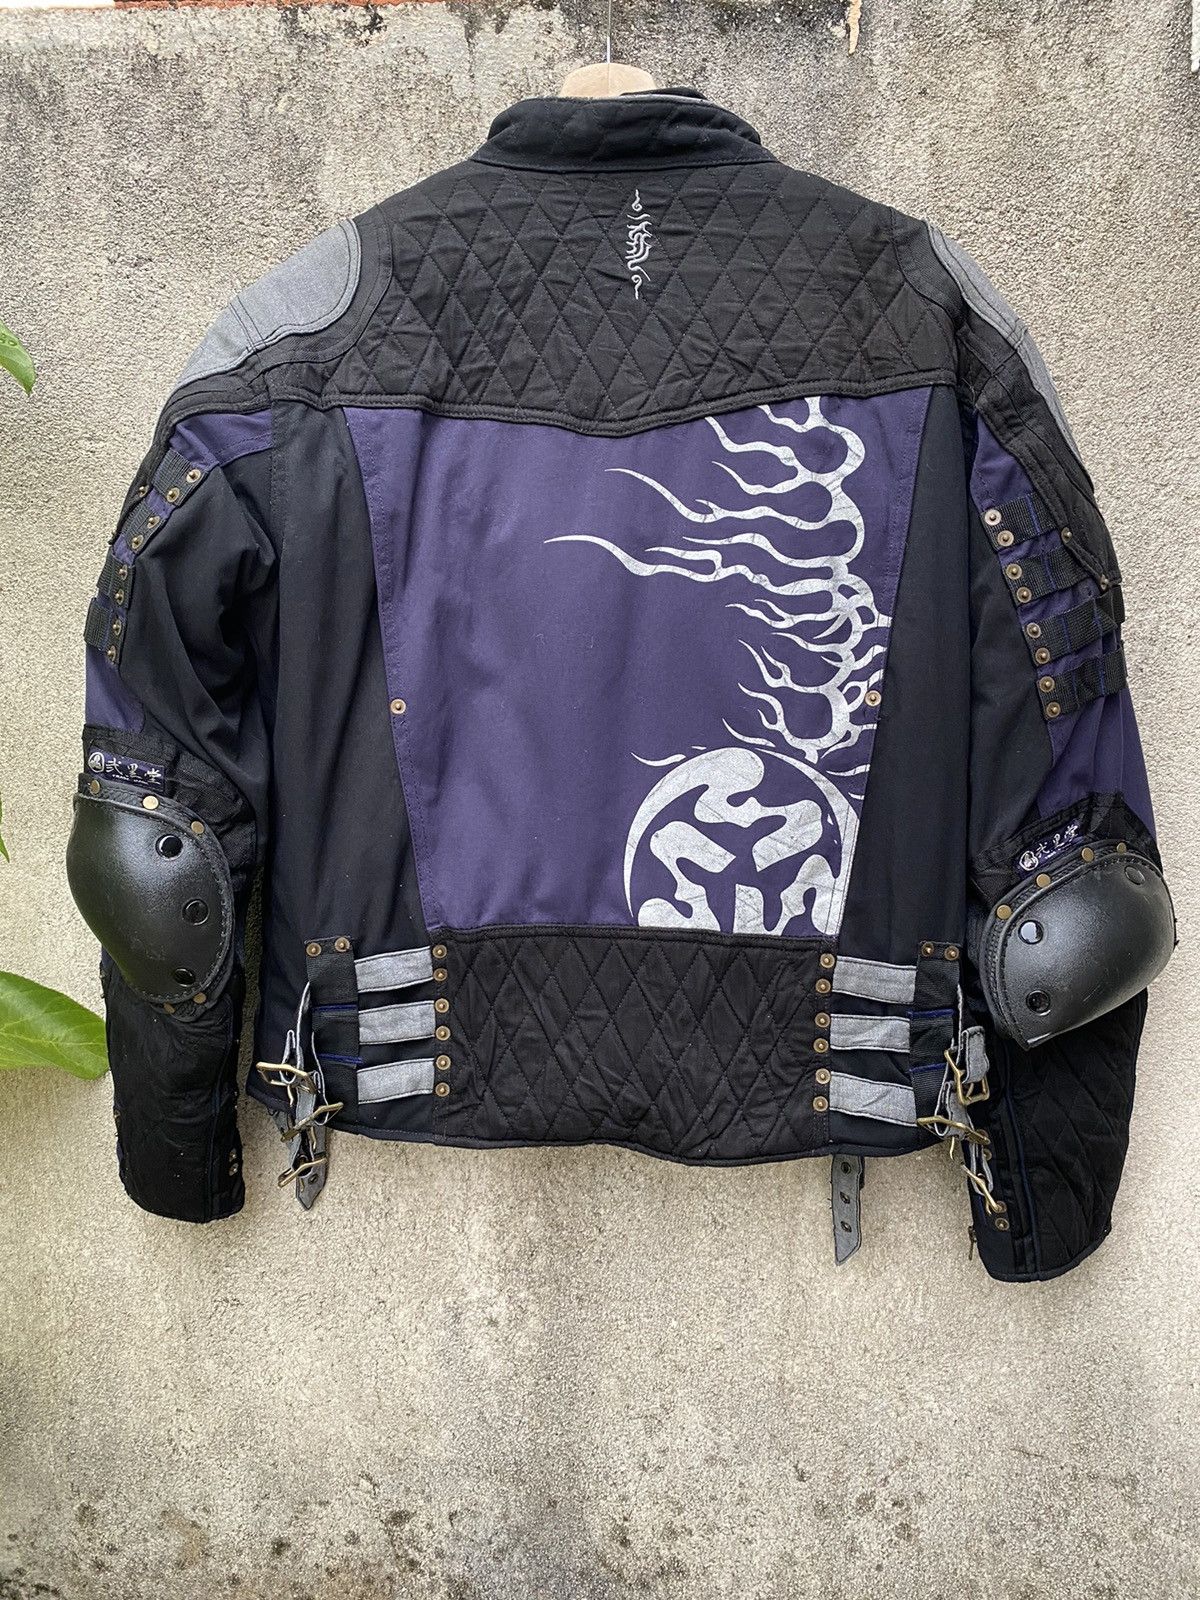 Sports Specialties - 🔥 Japanese Tradition Motorcycle Riding Jacket Rare Design - 3